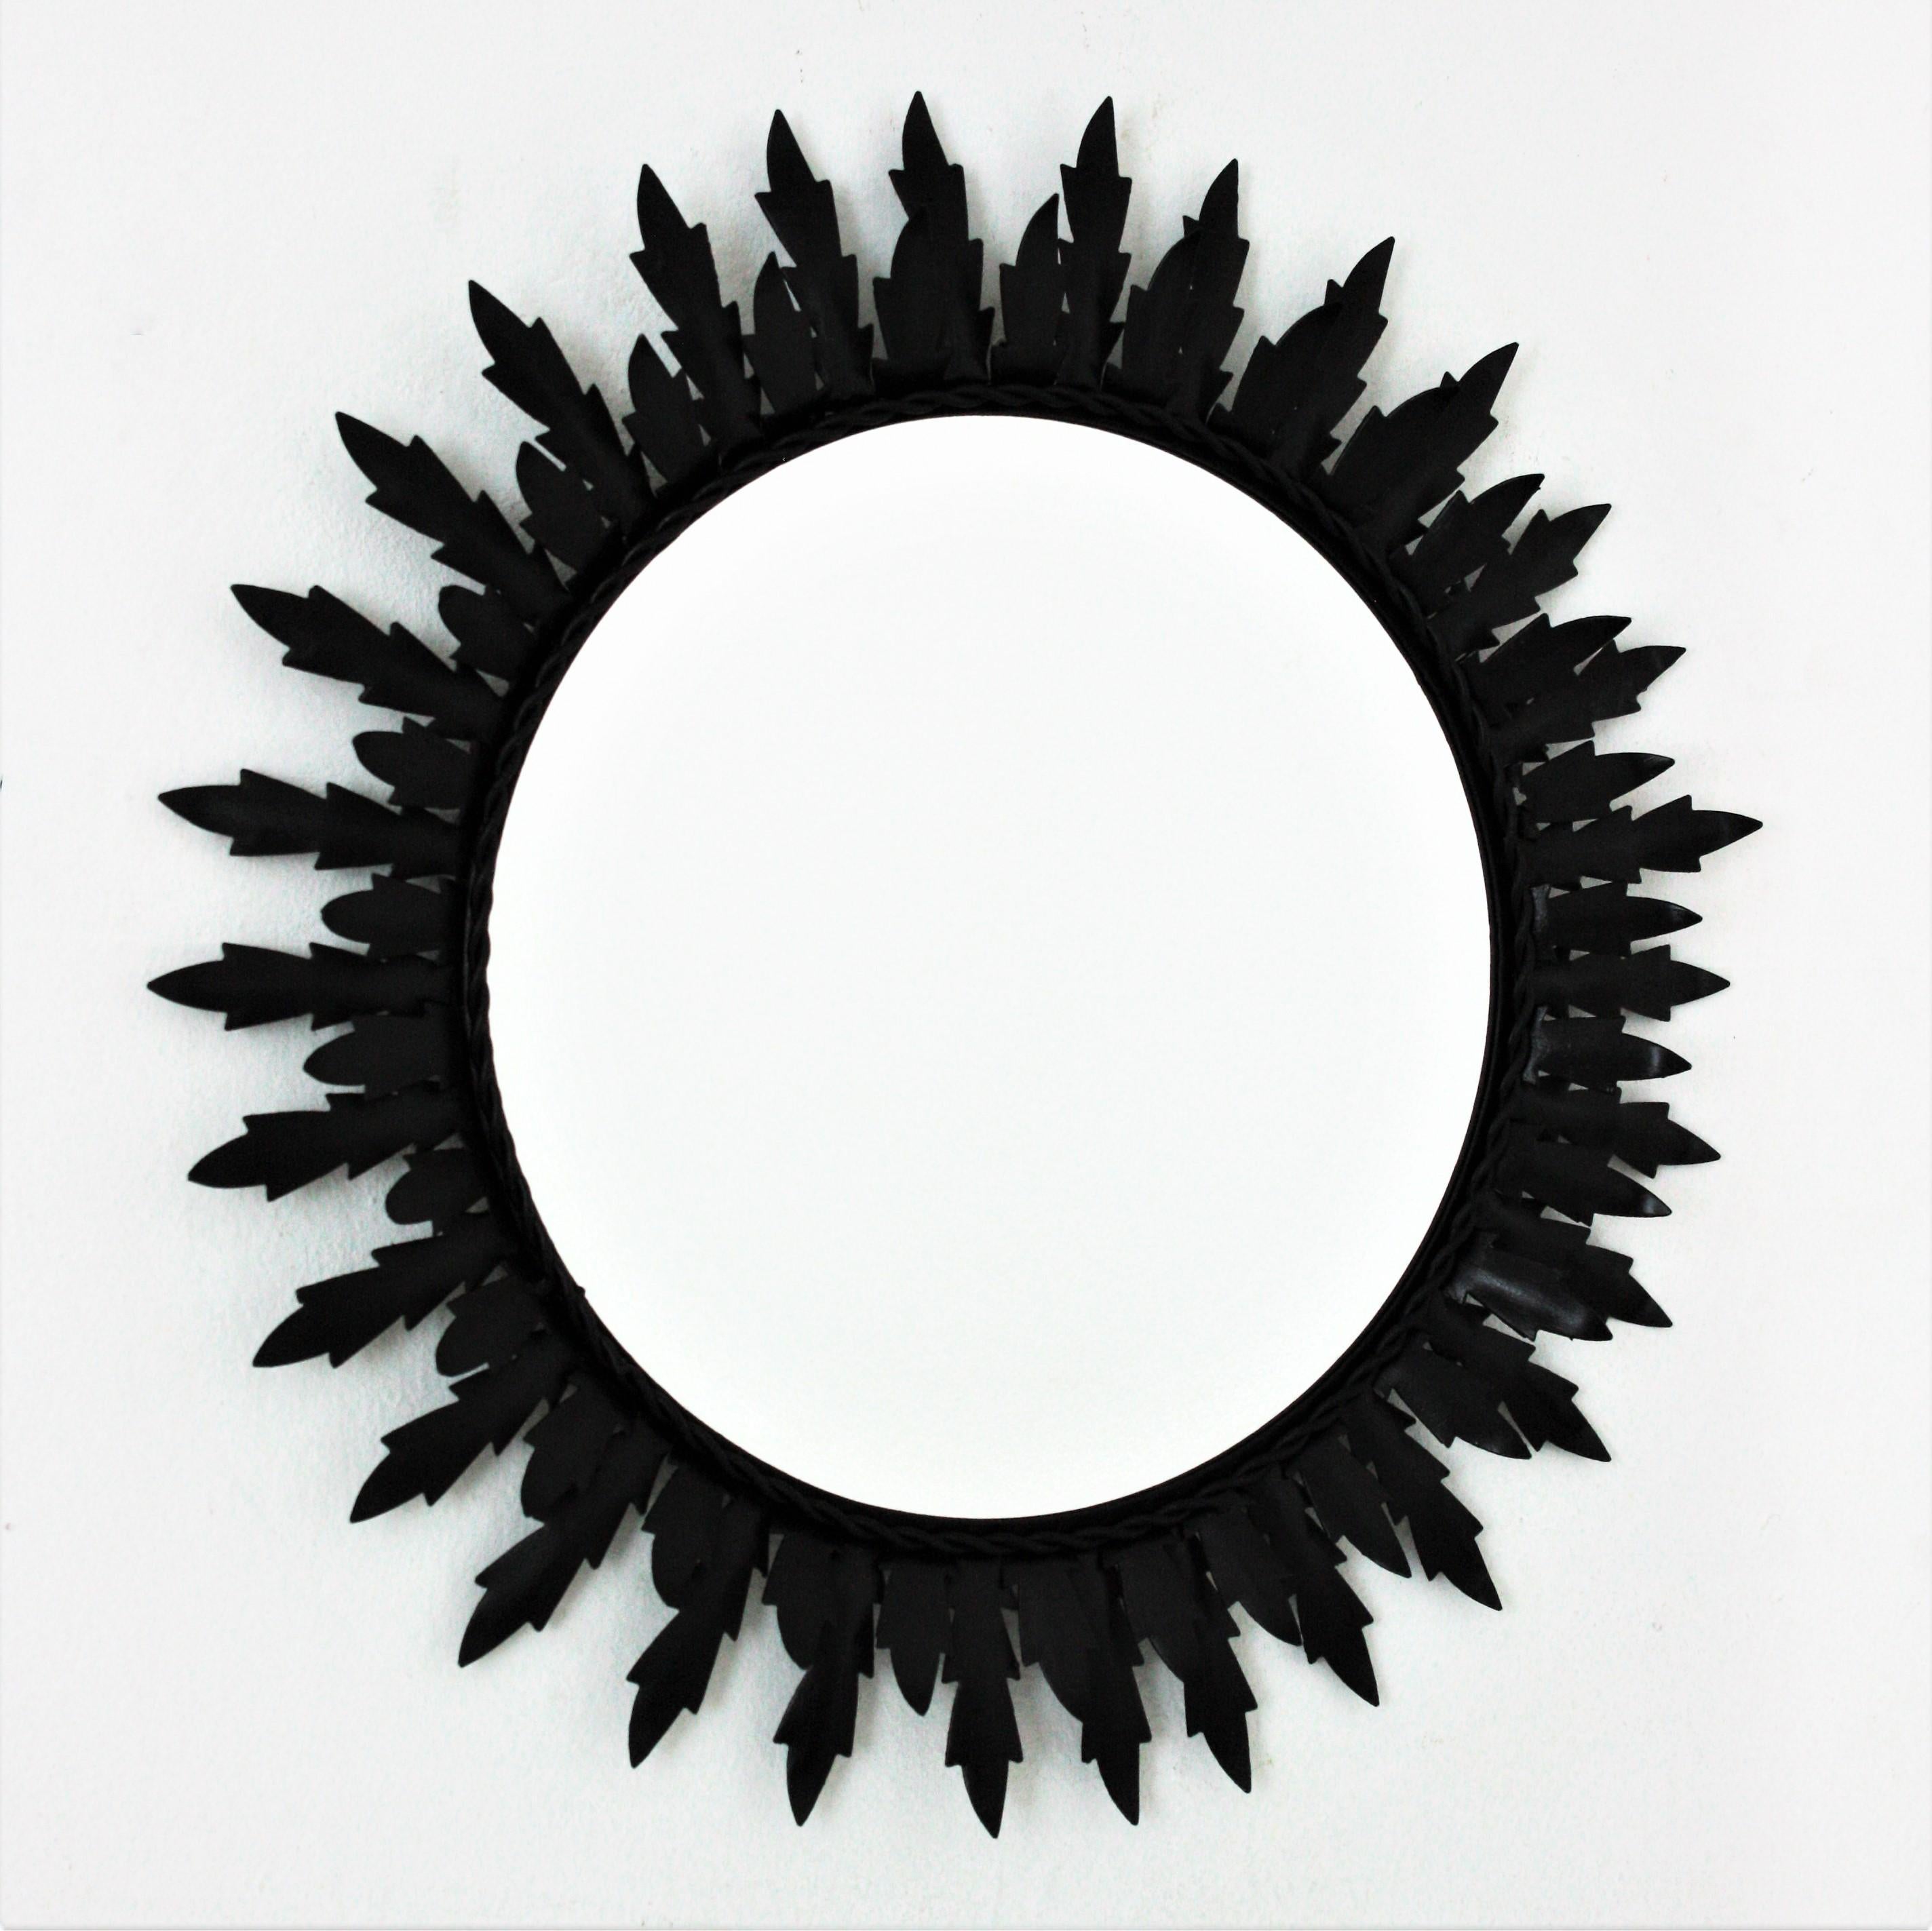 An eye-catching iron round sunburst mirror with black painted finishing, Spain, 1960s.
The frame is comprised by two layers of leaves surrounding the glass.
This wall mirror would be a nice addition in a contemporary or classical ambiance. Place